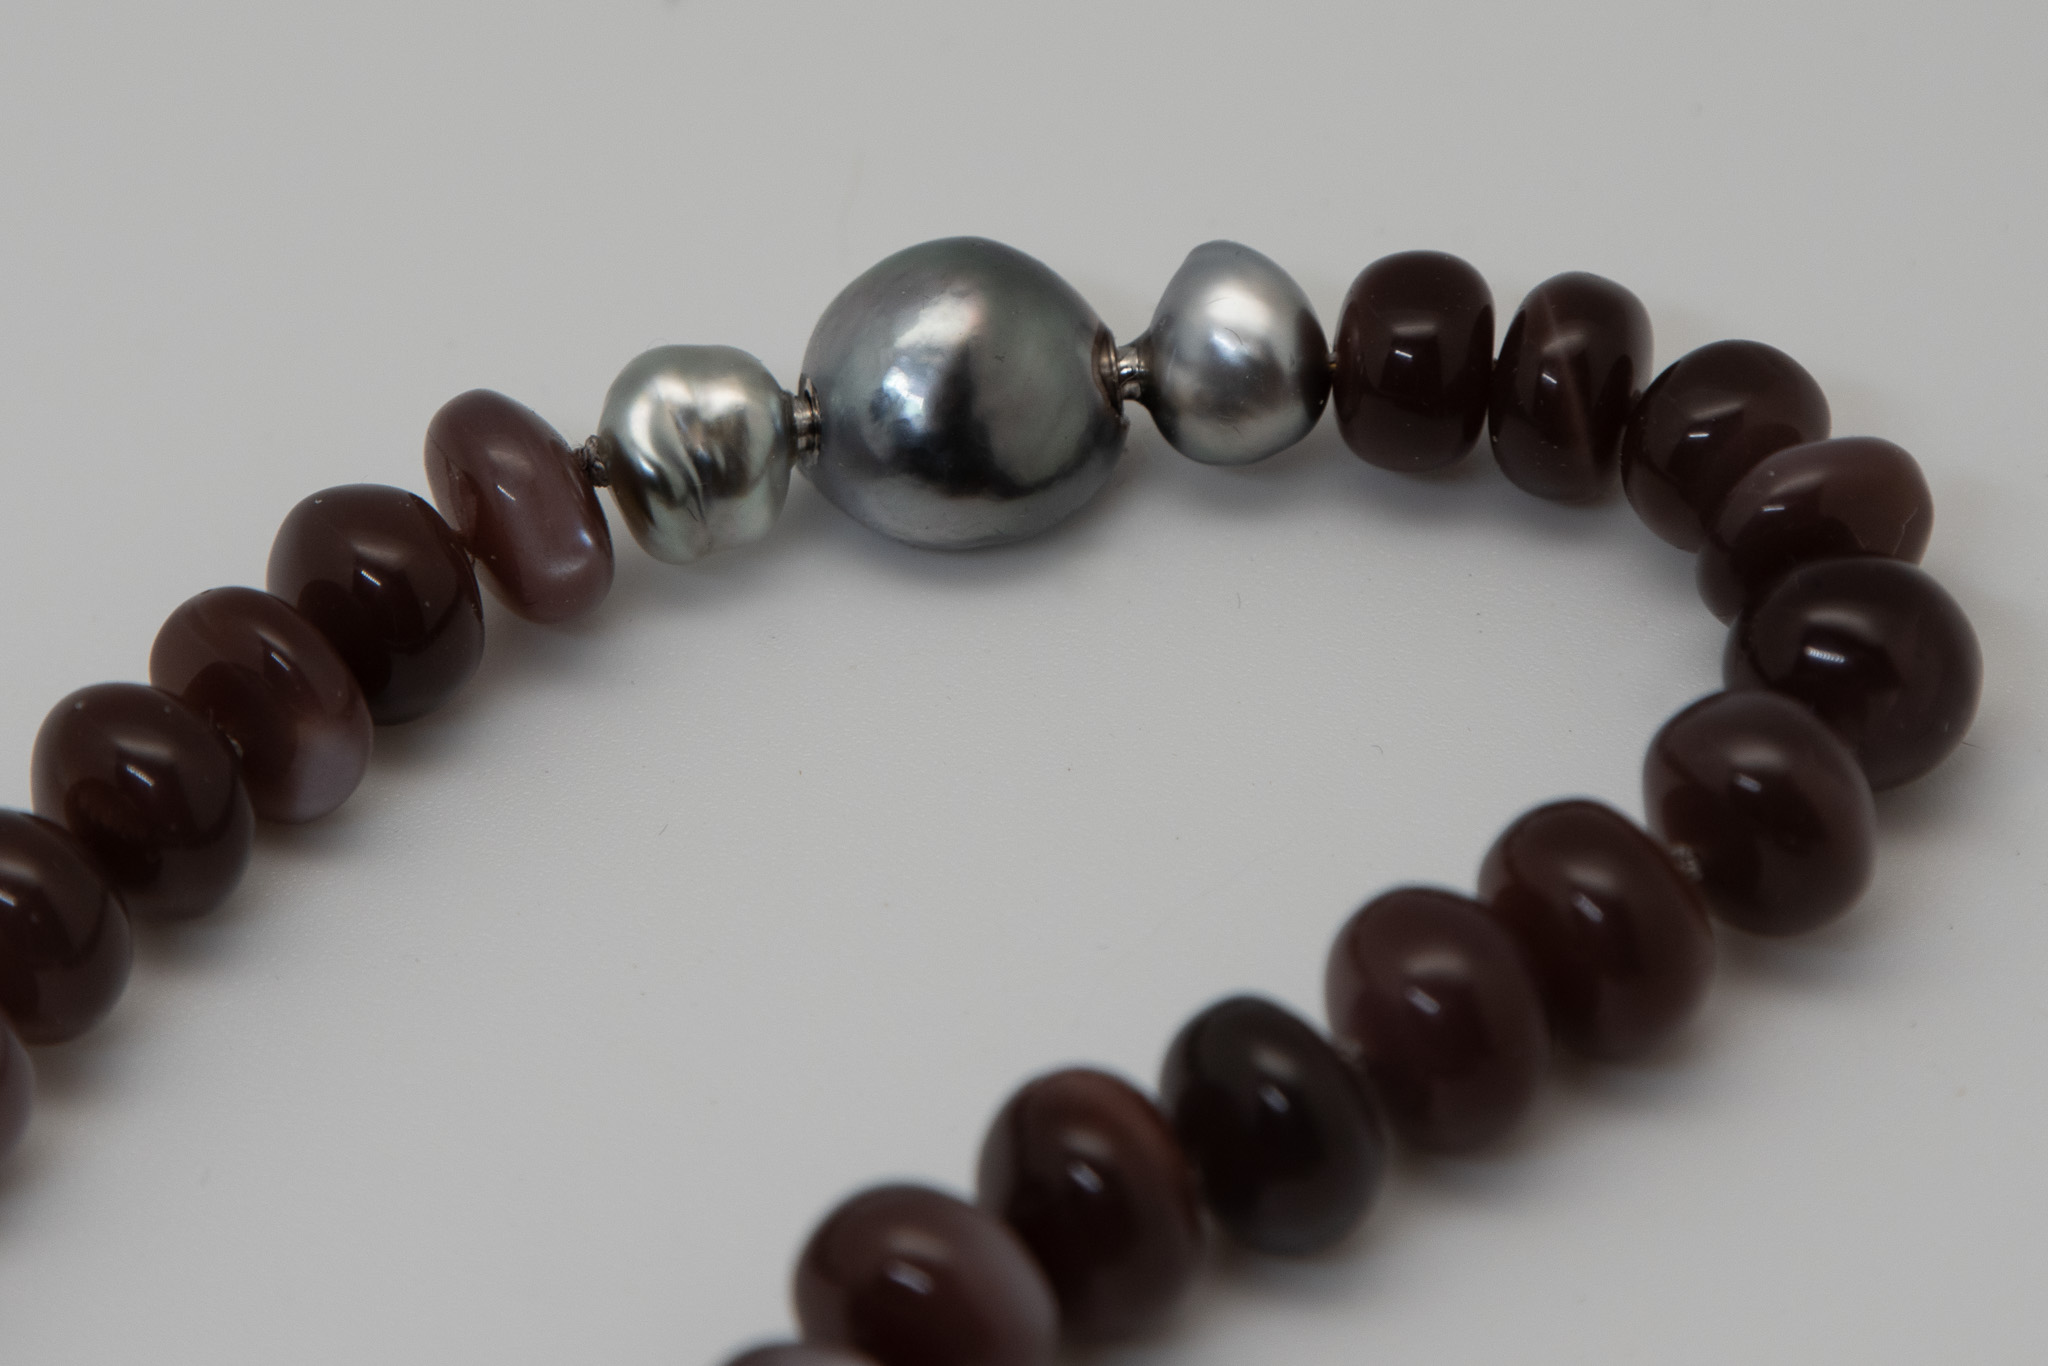 Chocolate moonstone necklace showing clasp detail of 13mm Tahitian pearl tube and key clasp flanked by gray Tahitian Keshi pearls